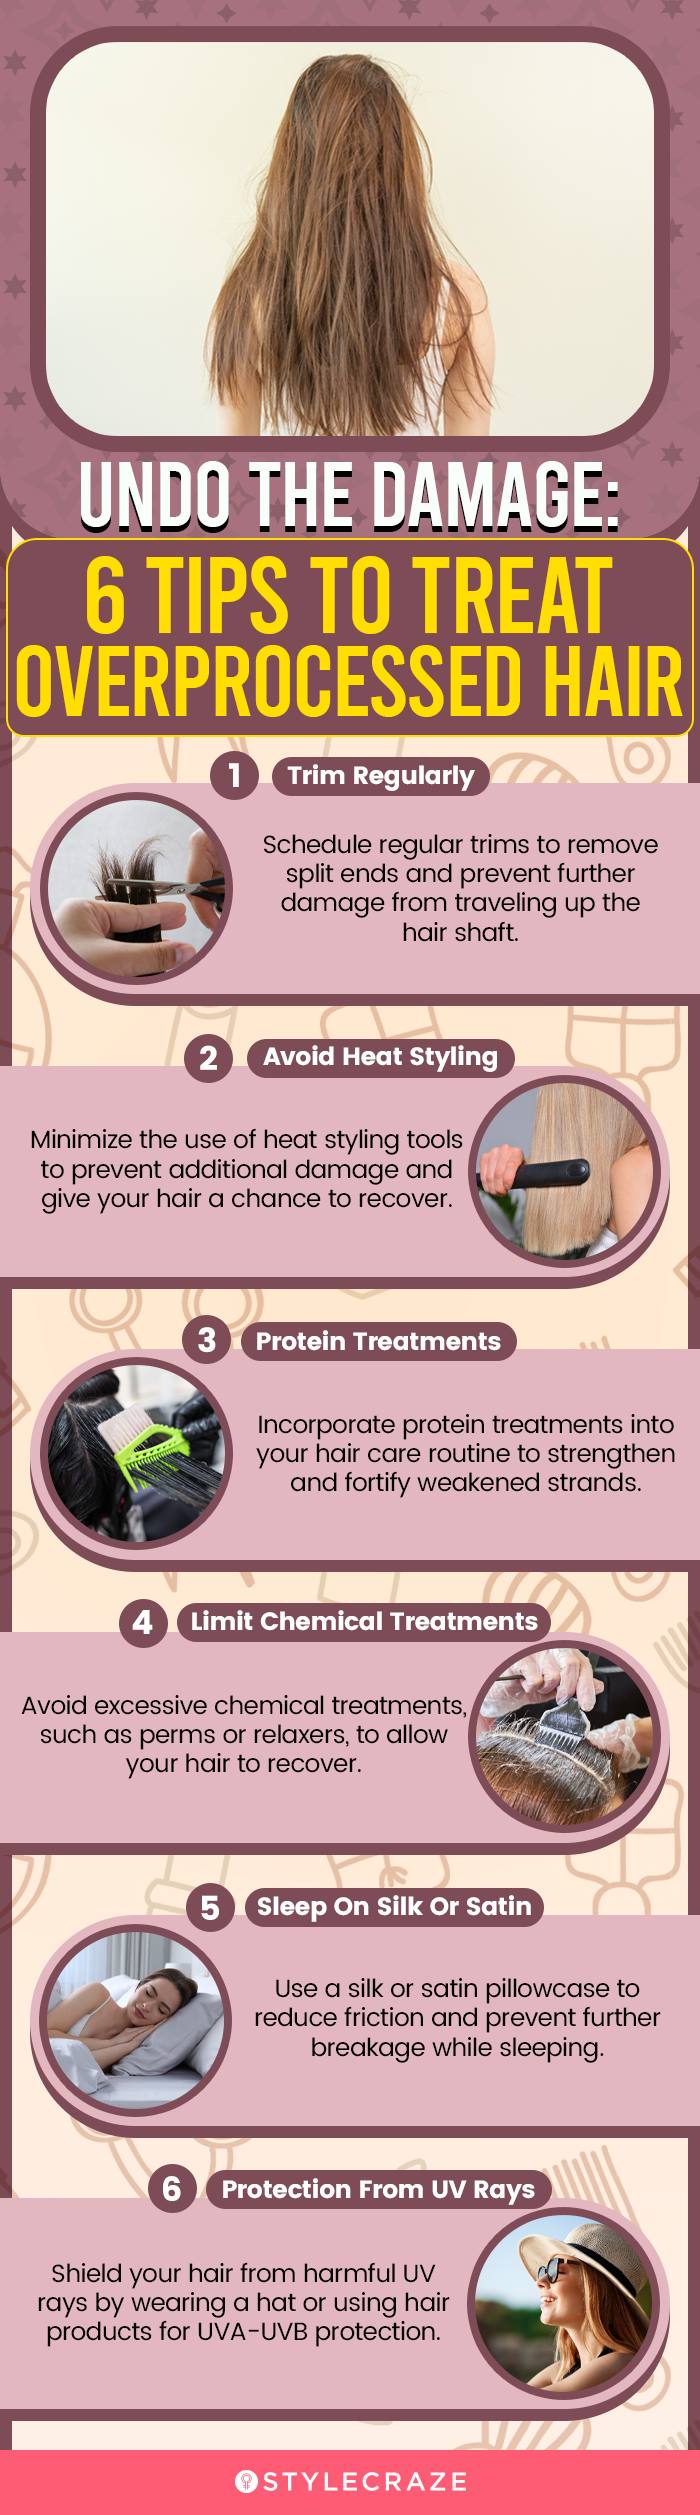 Undo The Damage: 6 Care Tips To Treat Overprocessed Hair(infographic)